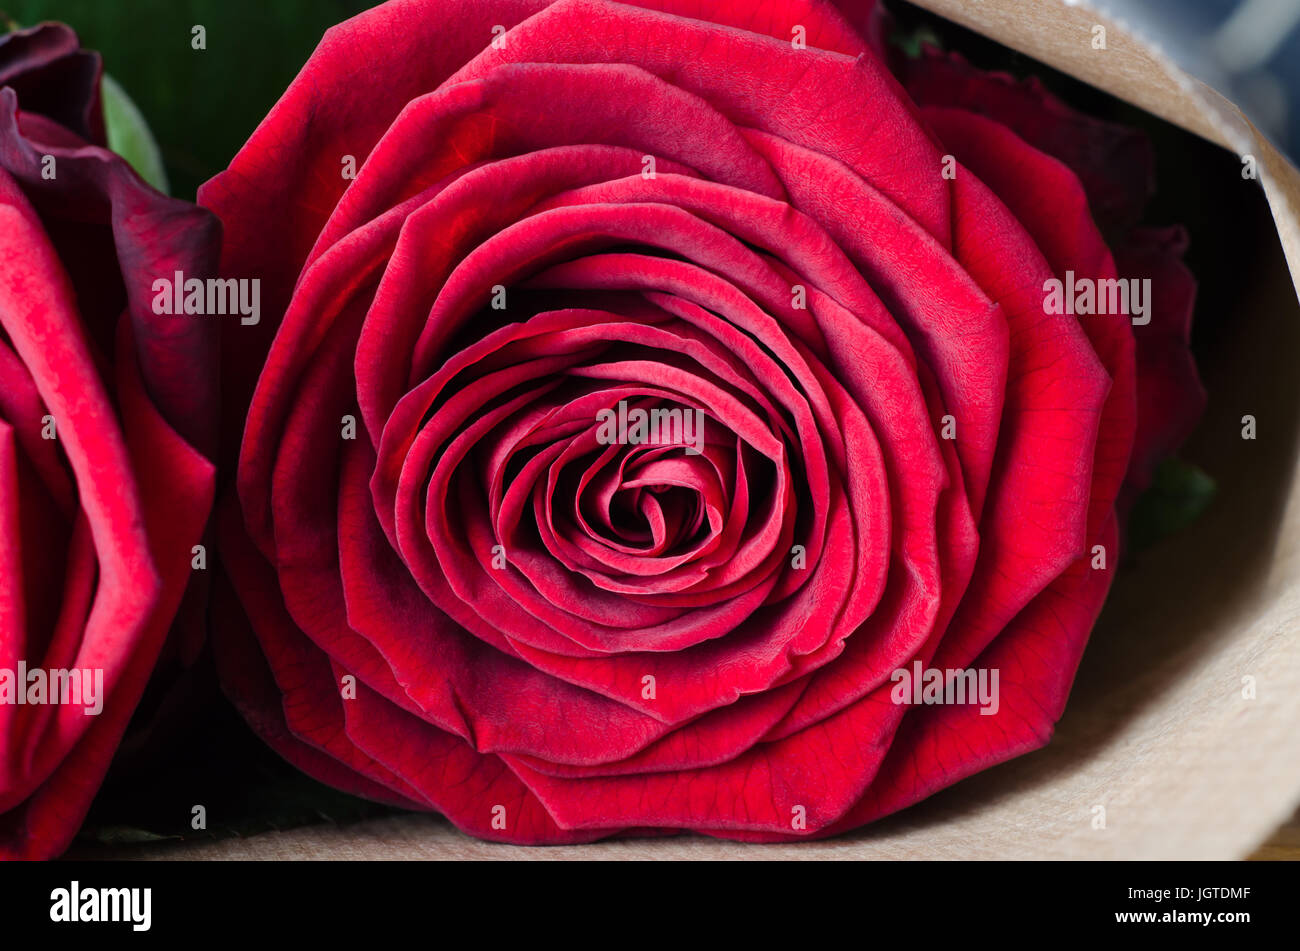 Close up (macro) of a fully bloomed red rose wrapped in brown paper as part of a bouquet.  Head of the rose is at eye level, facing camera. Stock Photo